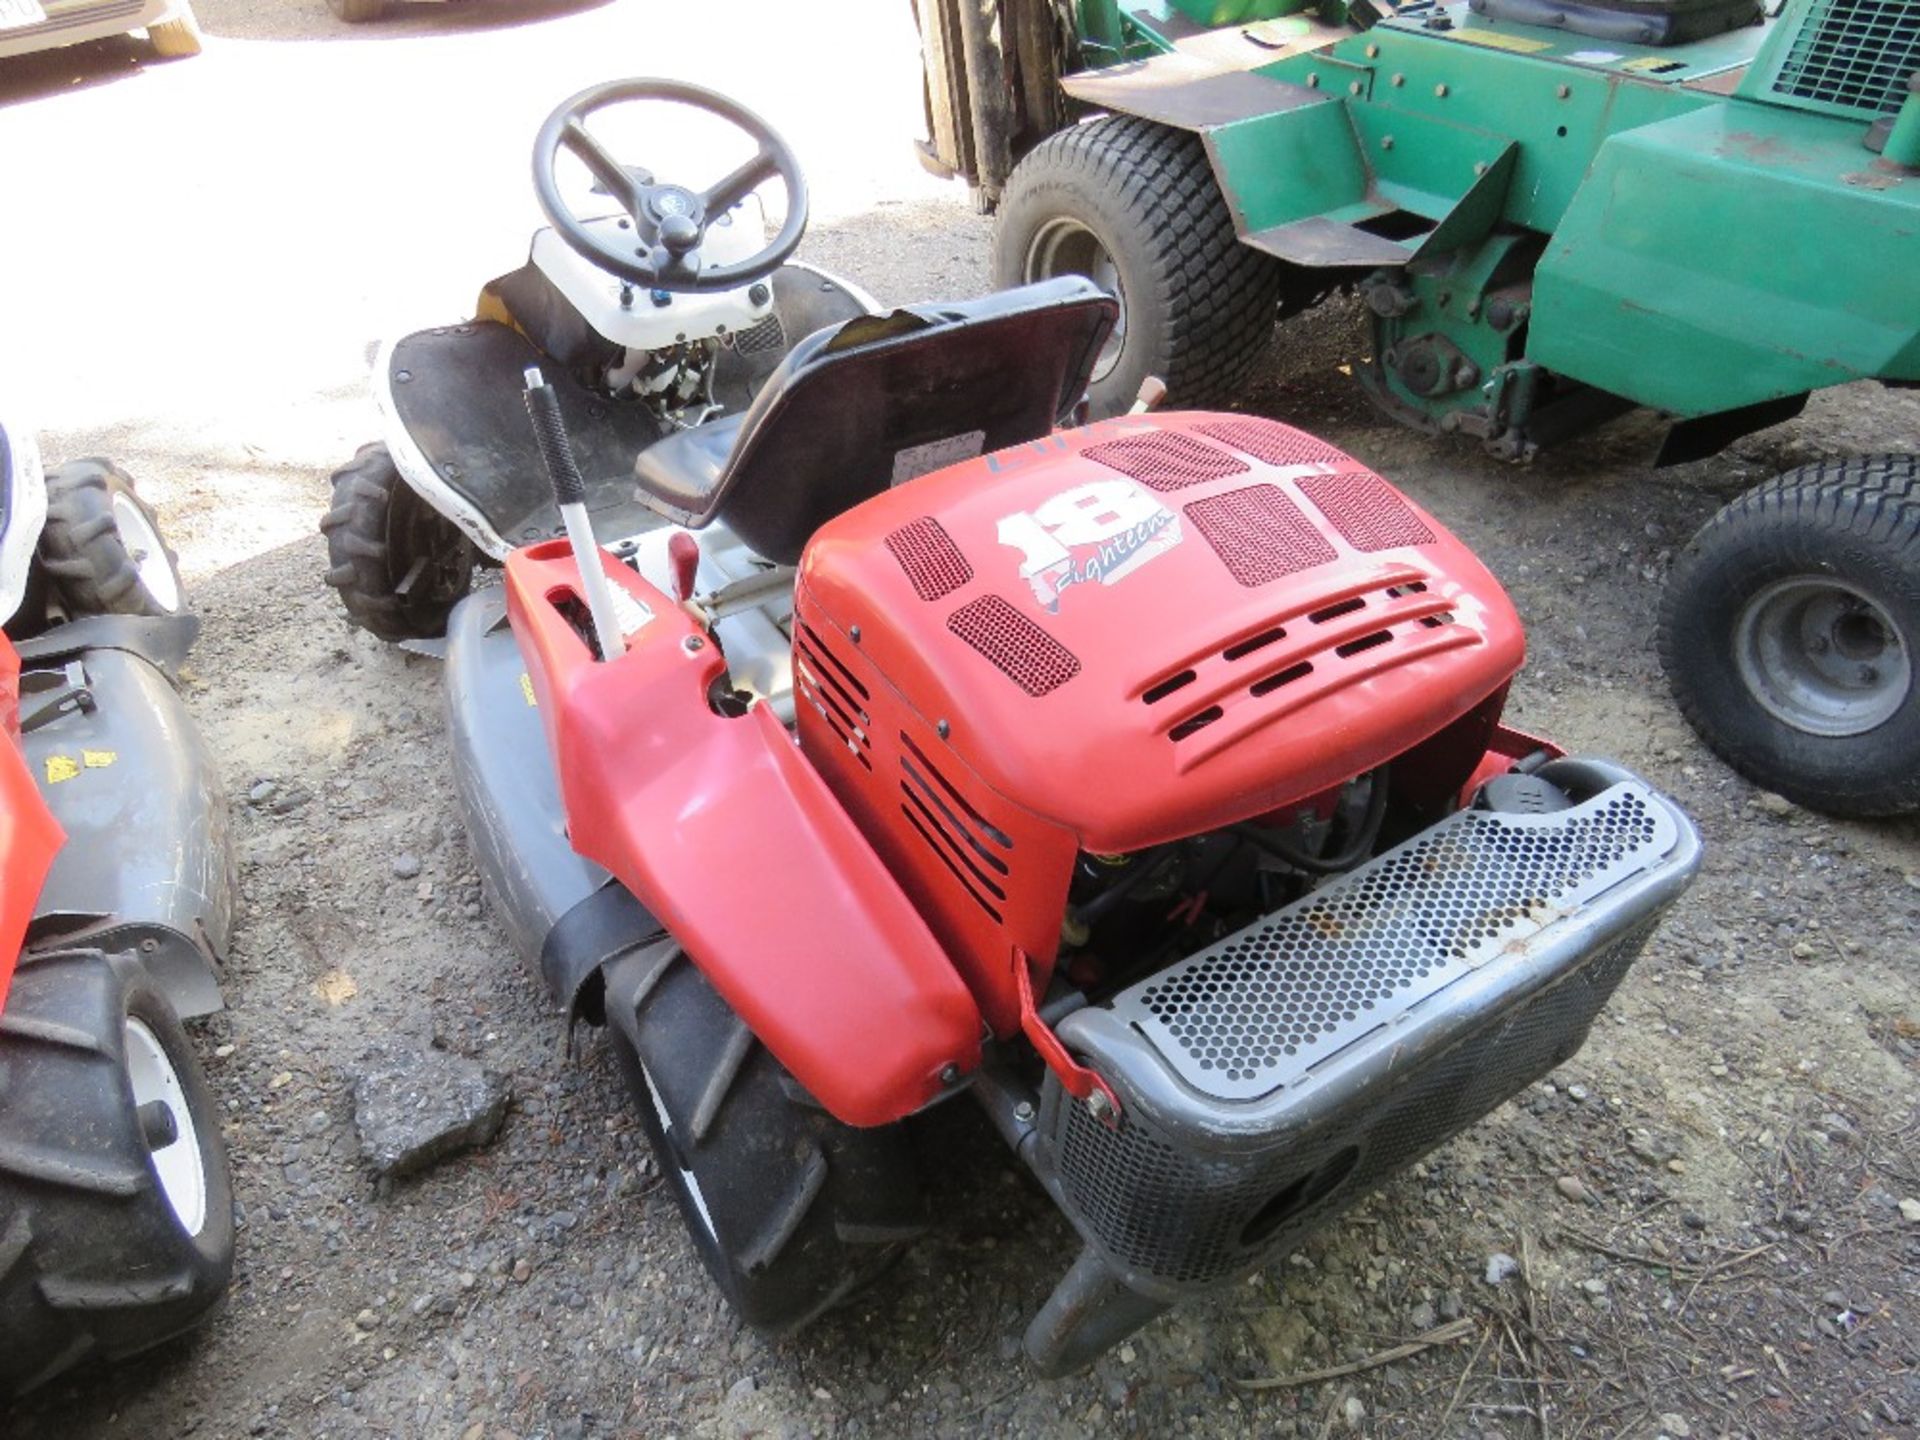 OREC RM97B PROFESSIONAL ROUGH CUT RIDE ON MOWER, YEAR 2015 BUILD, 391 REC HOURS. PN:92/47. SN:JD15A0 - Image 5 of 6